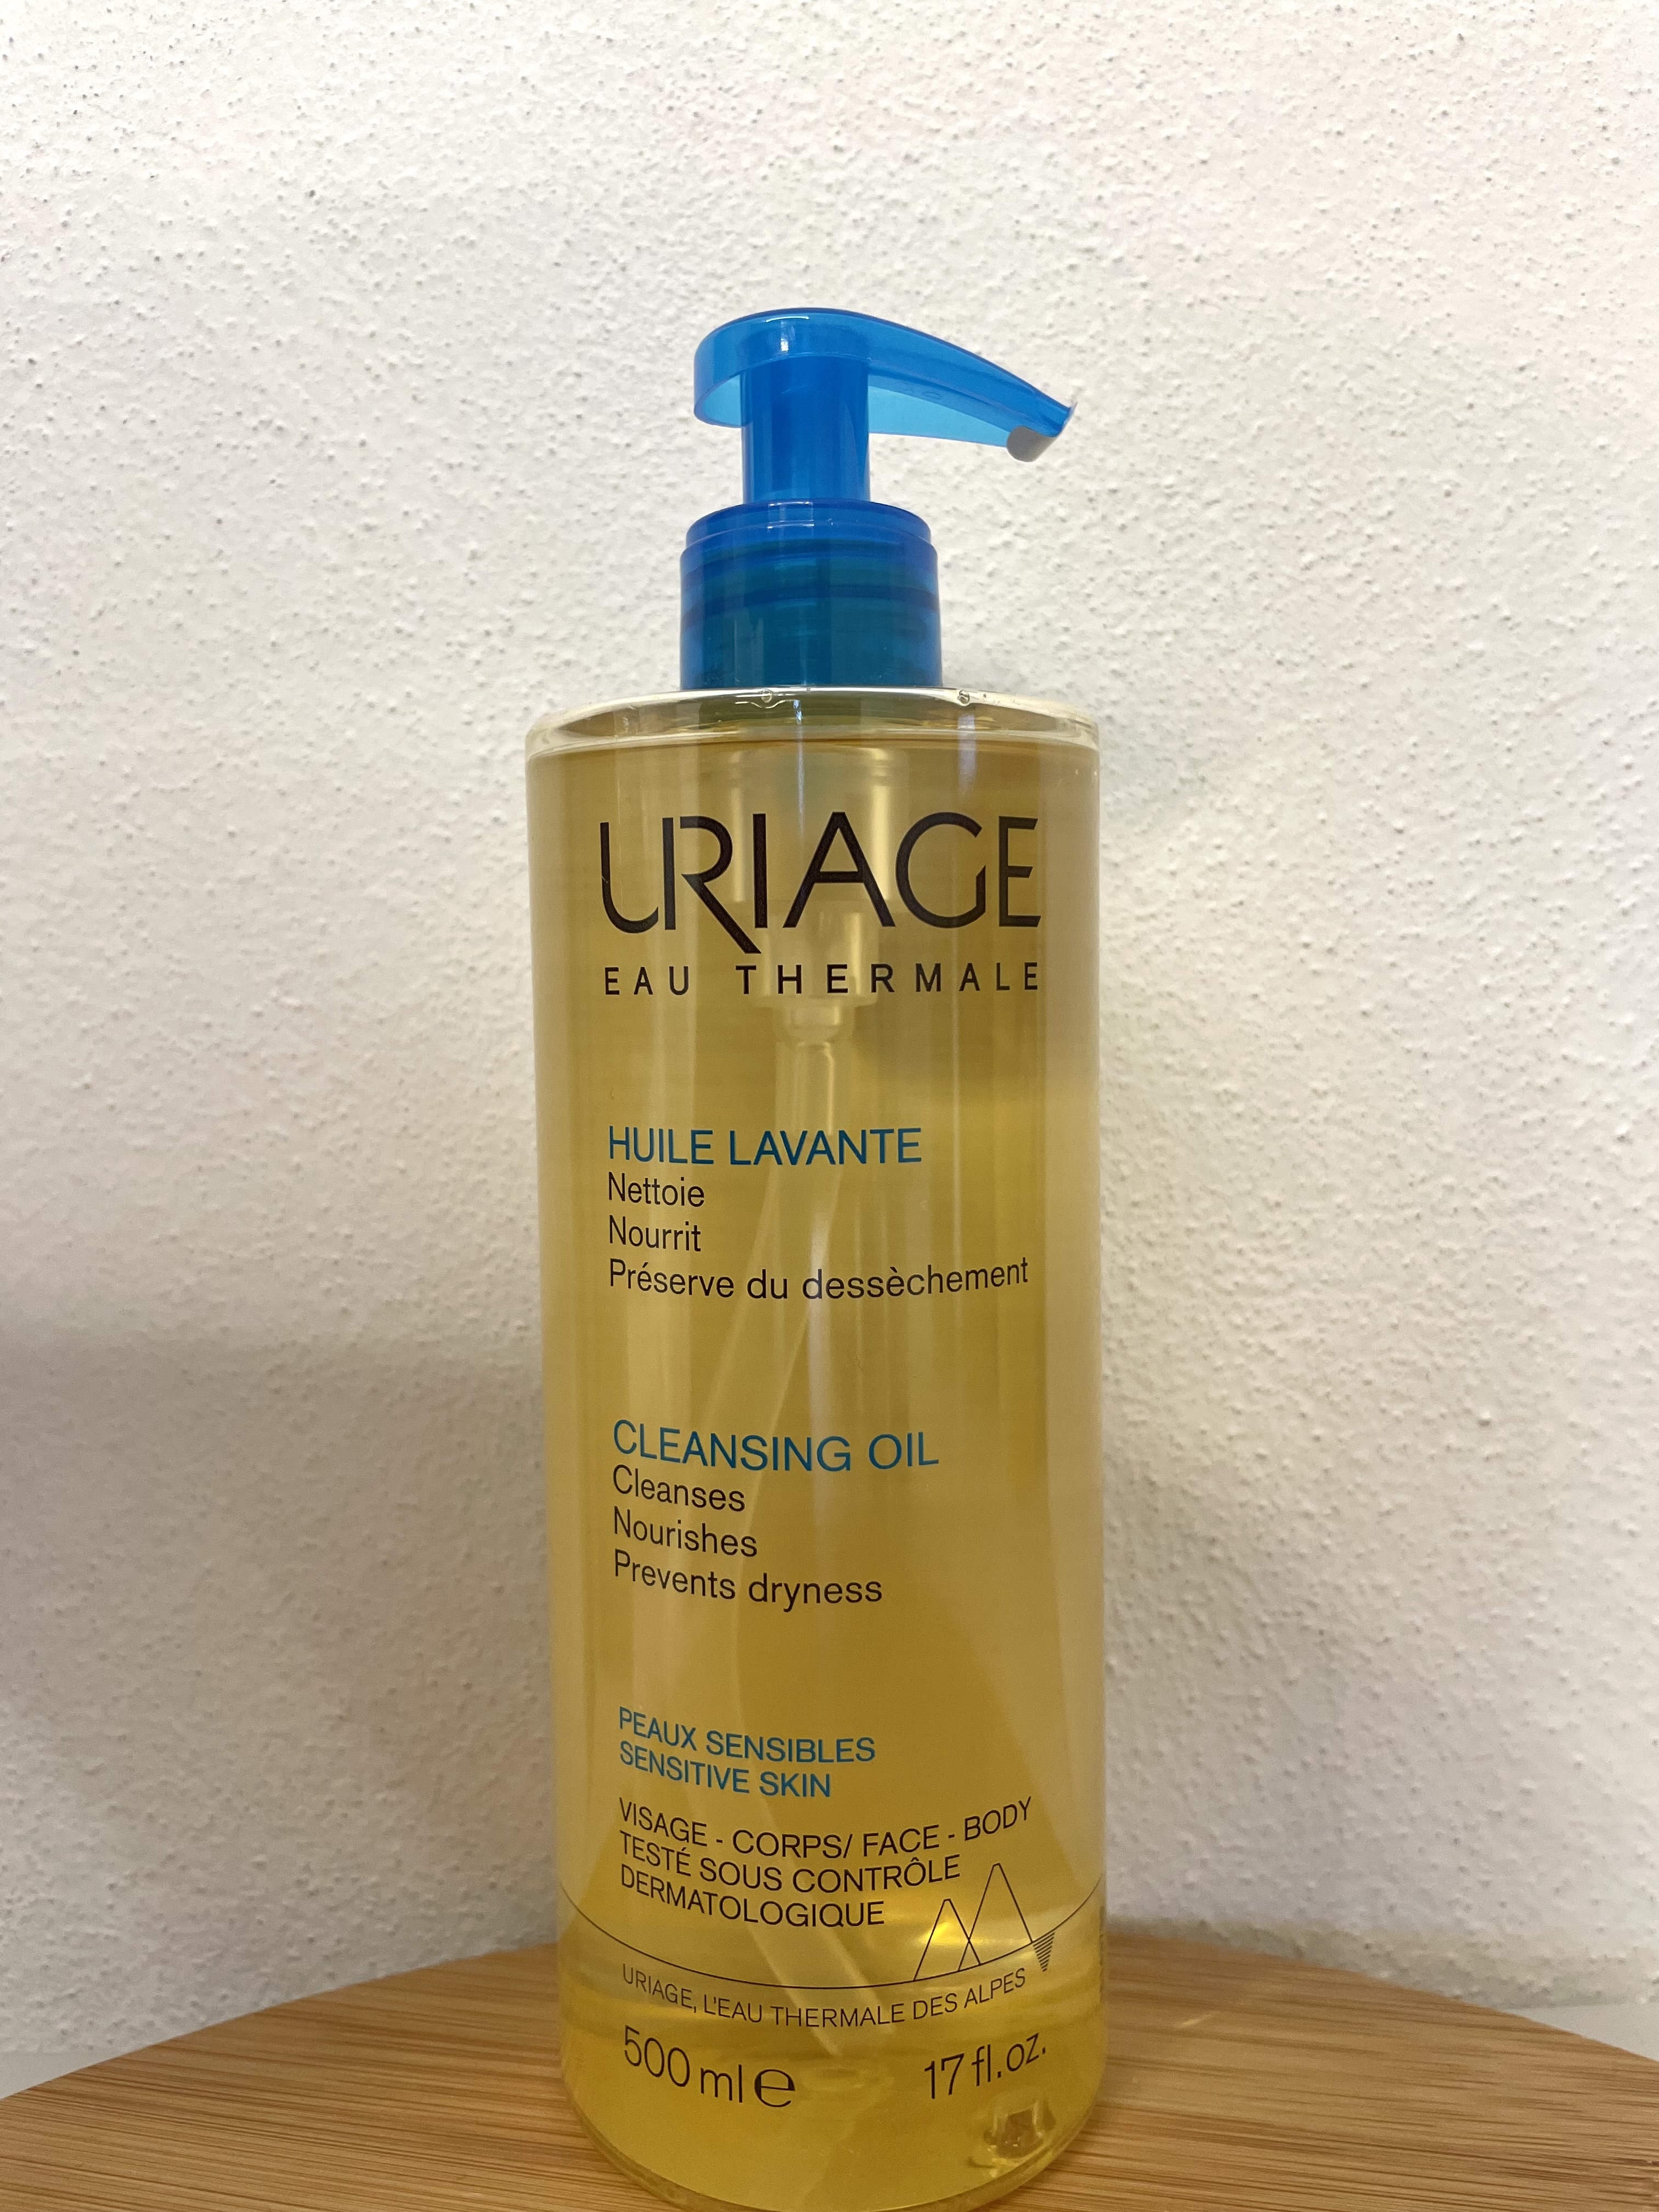 Uriage: Cleansing Oil